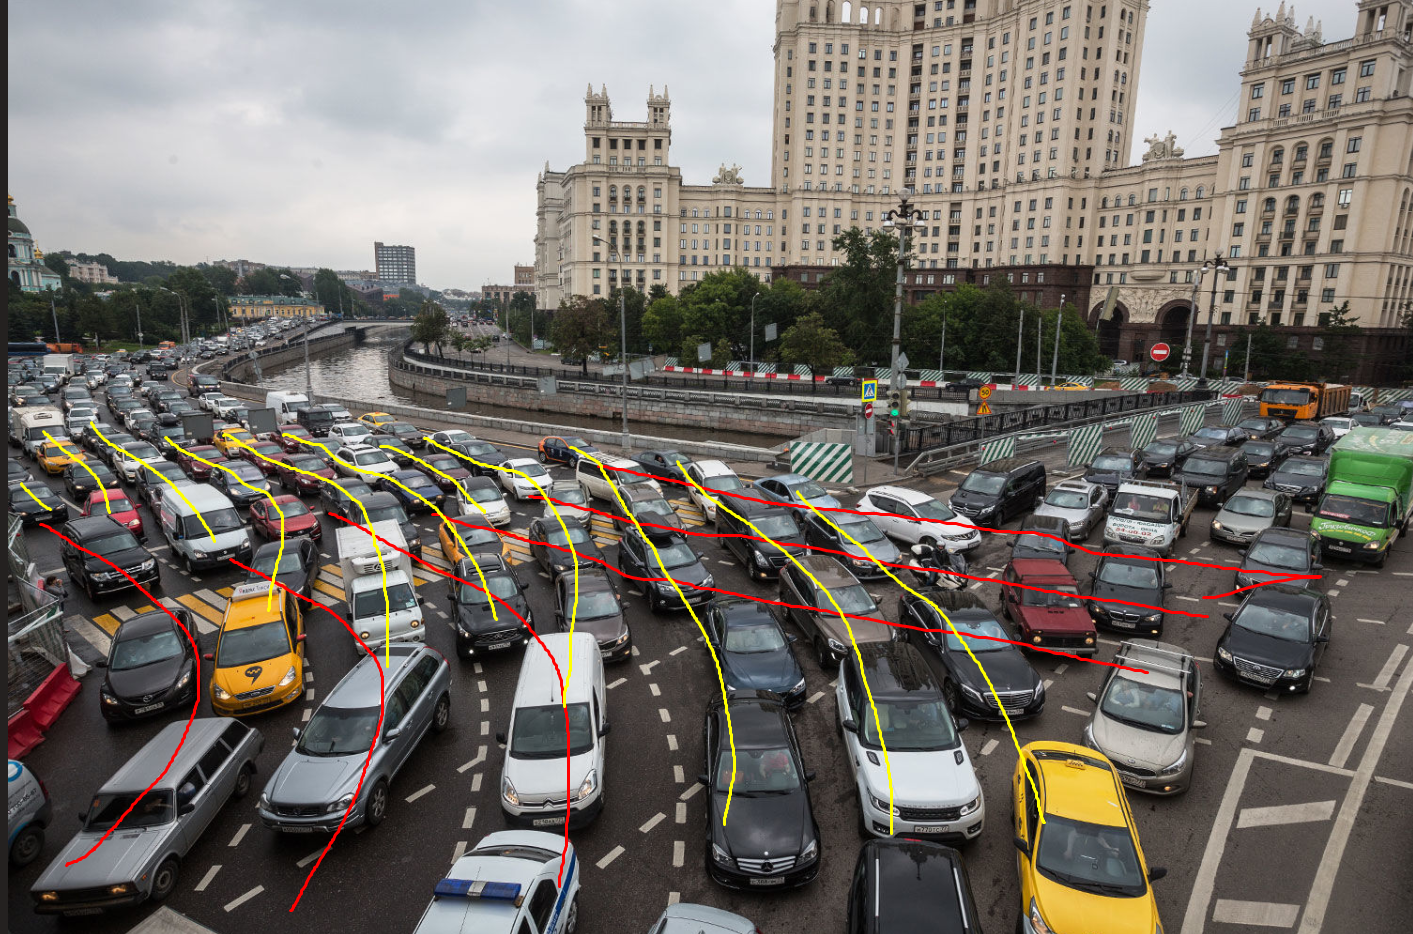 Why traffic jams in Moscow - My, Traffic jams, Moscow, Non-rubber